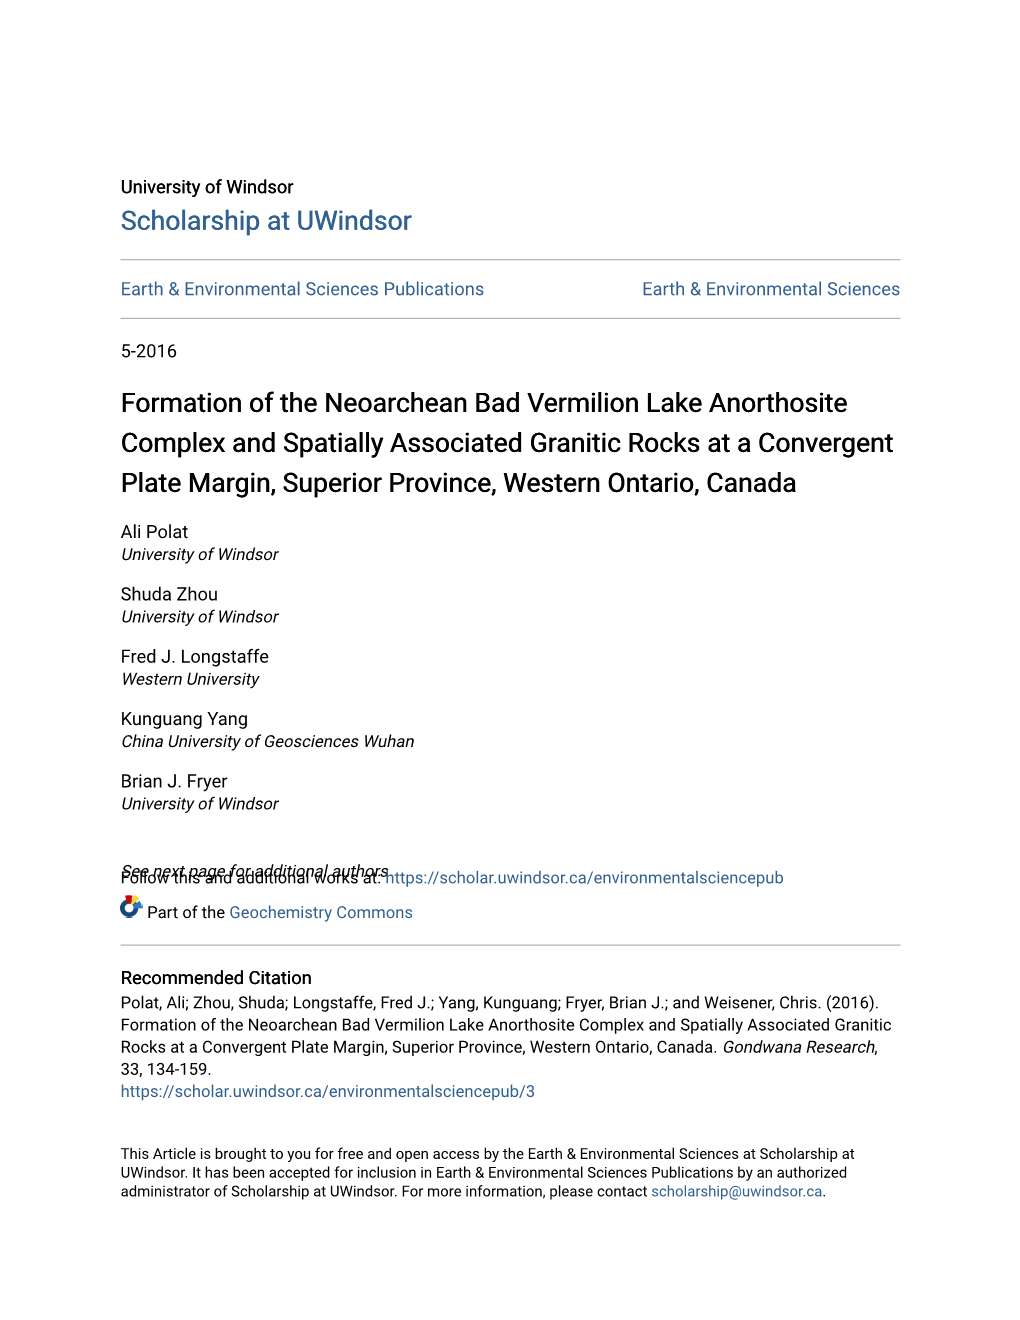 Formation of the Neoarchean Bad Vermilion Lake Anorthosite